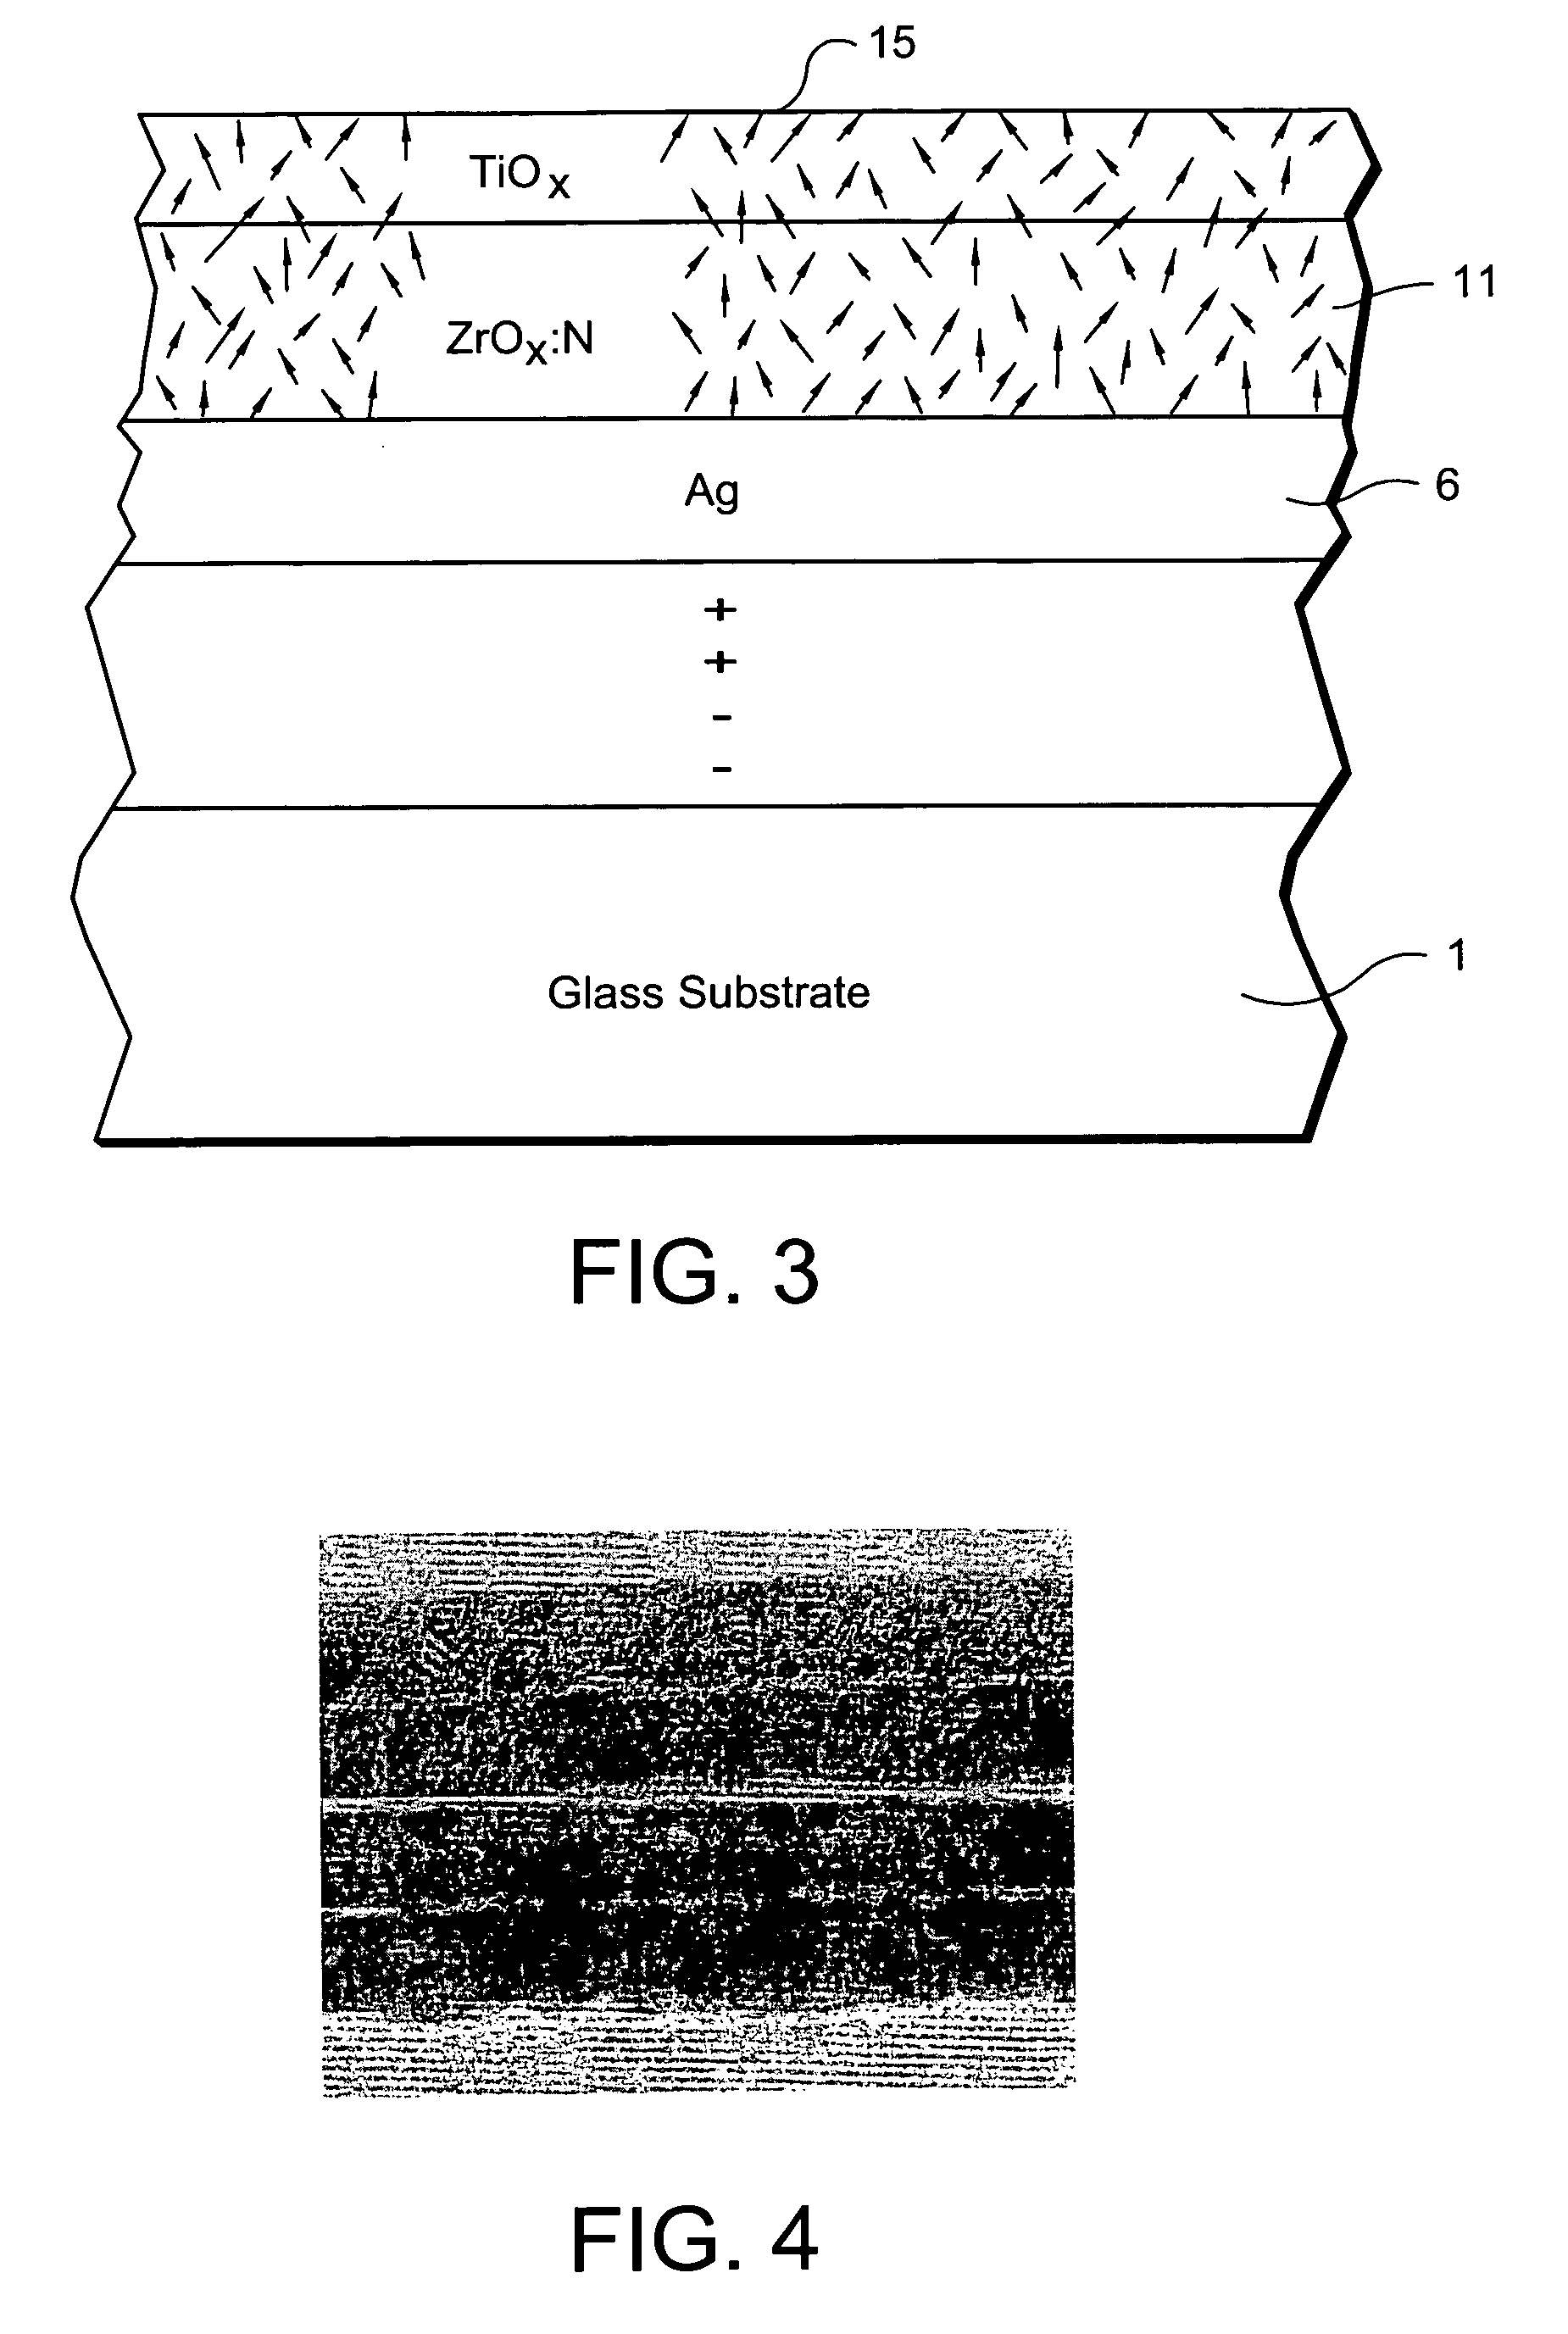 Window with anti-bacterial and/or anti-fungal feature and method of making same